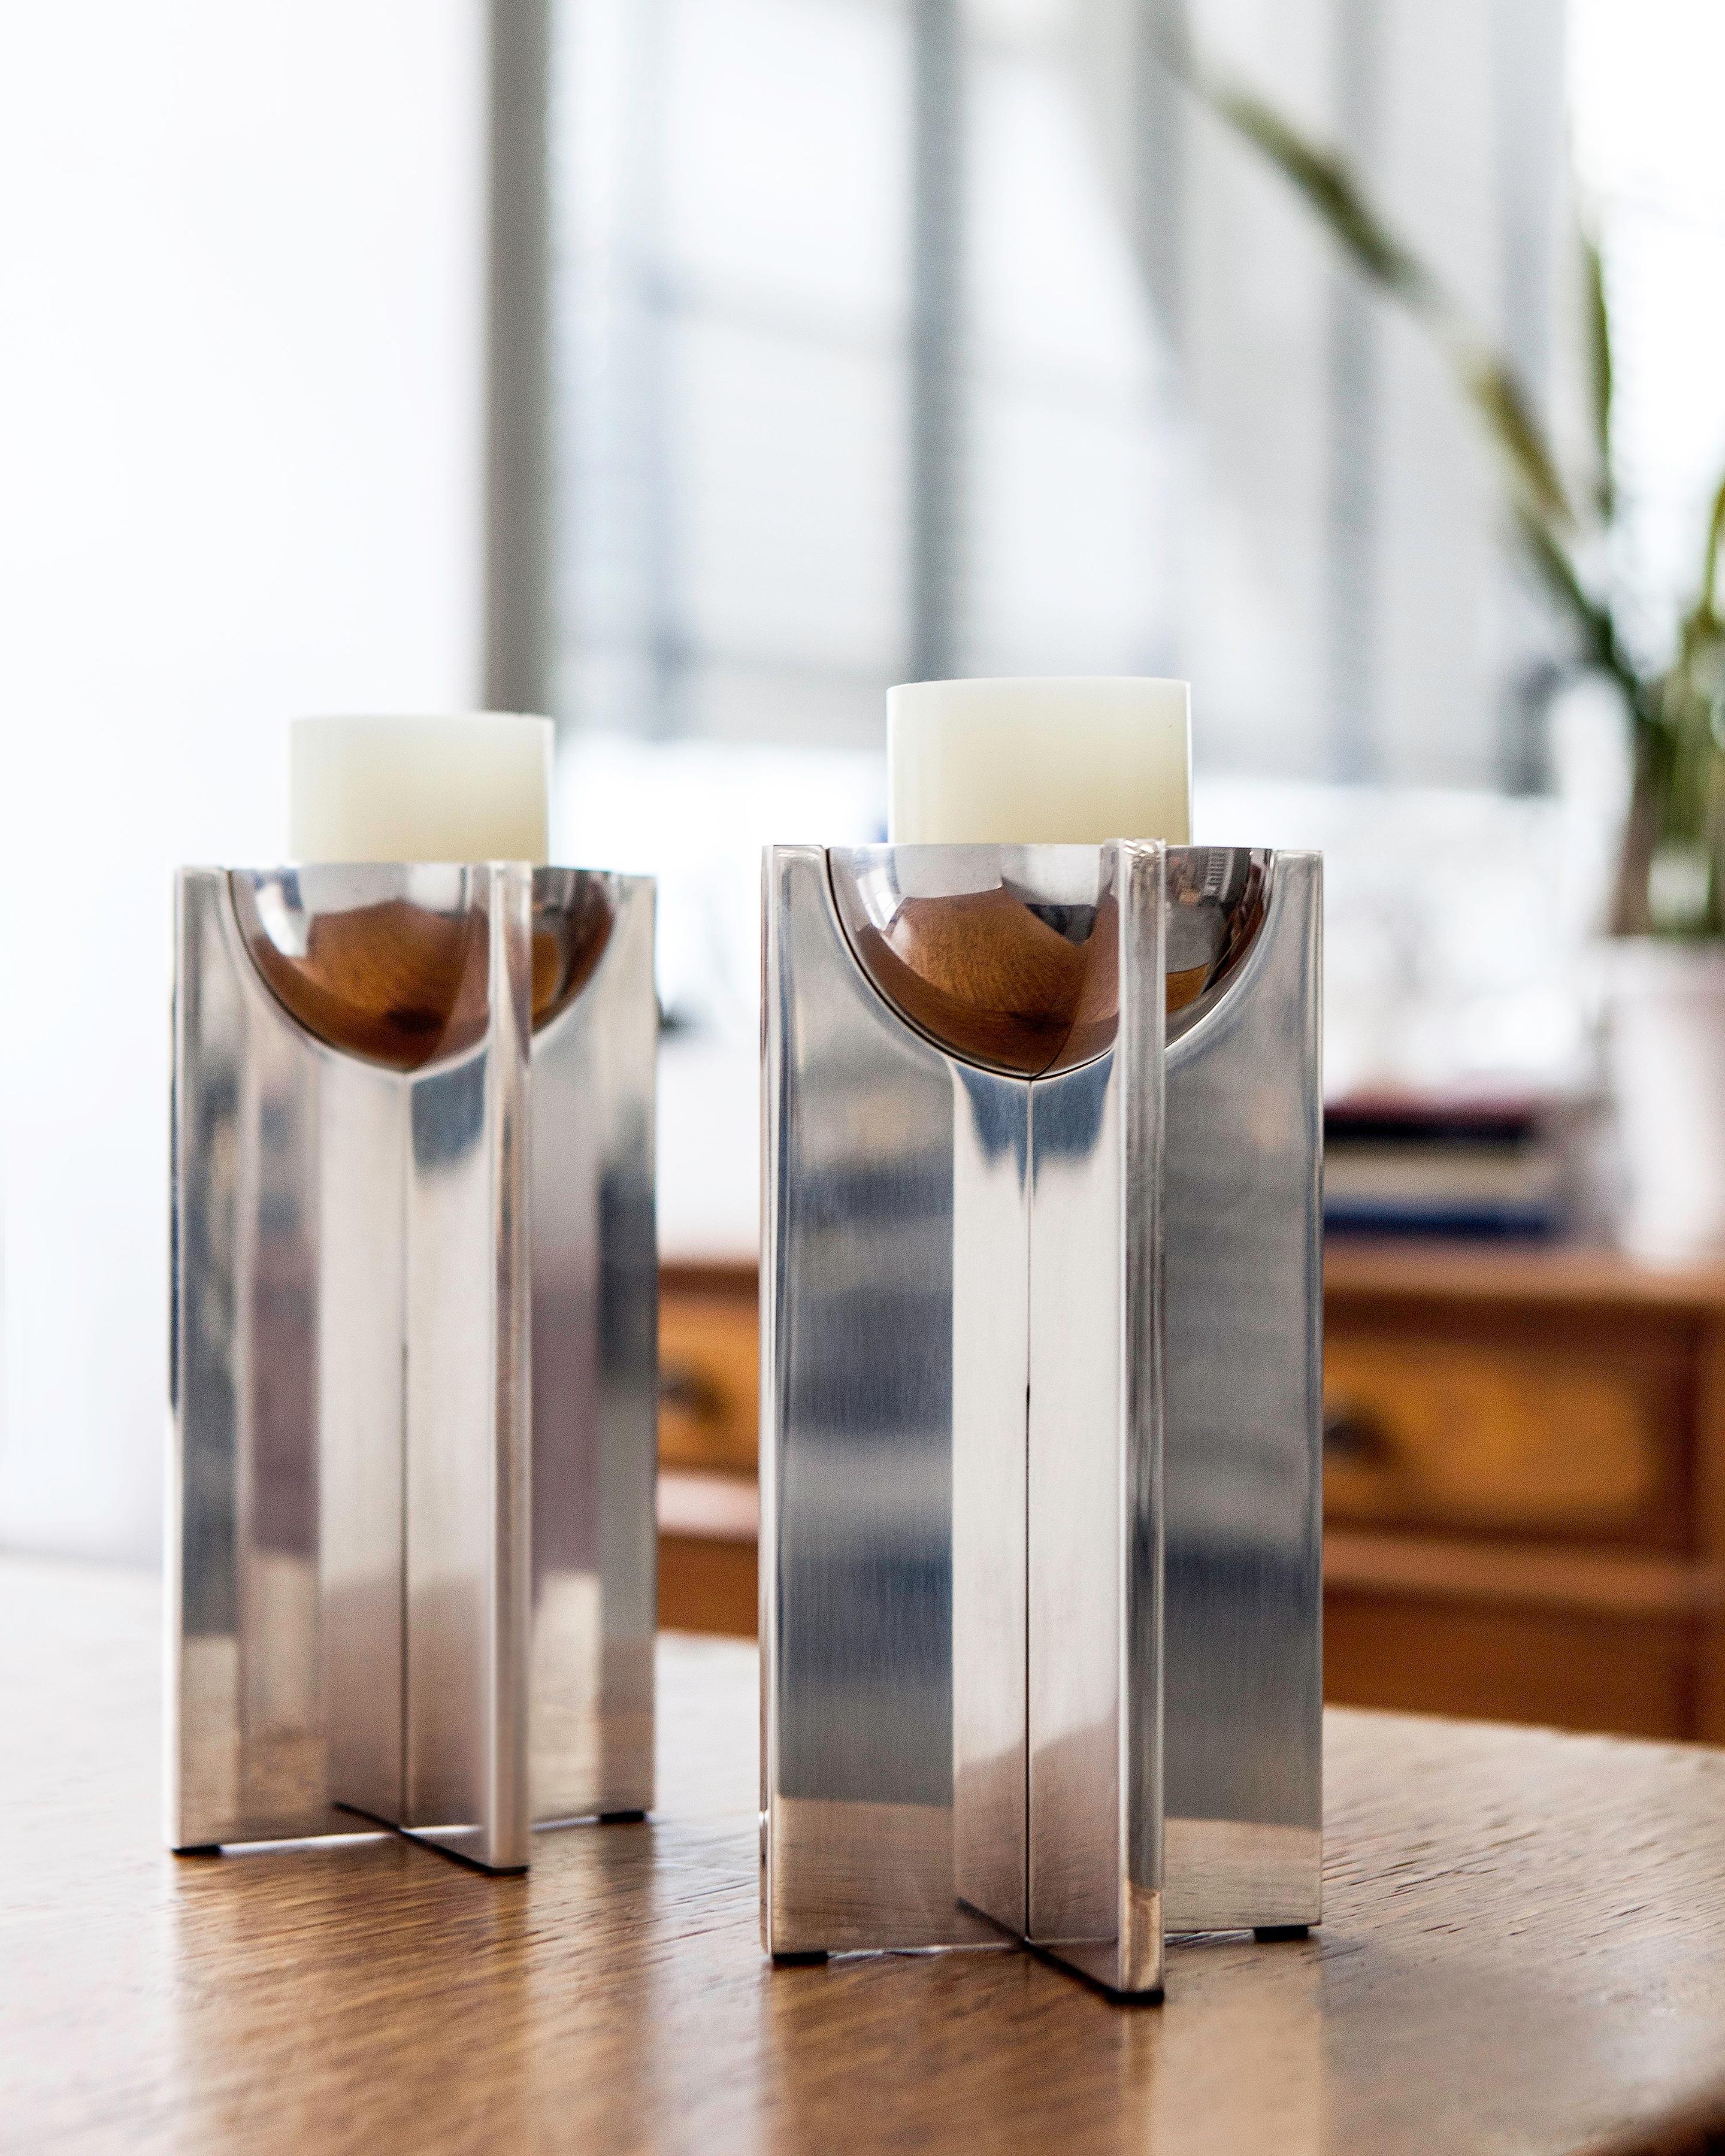 The XOXO candlestick is all about geometry: the strong geometric X shaped base embraces the round O of the candle cup forming an XO for love. Or, more specifically, hugs and kisses. Milled and turned in solid brass then hand polished in an